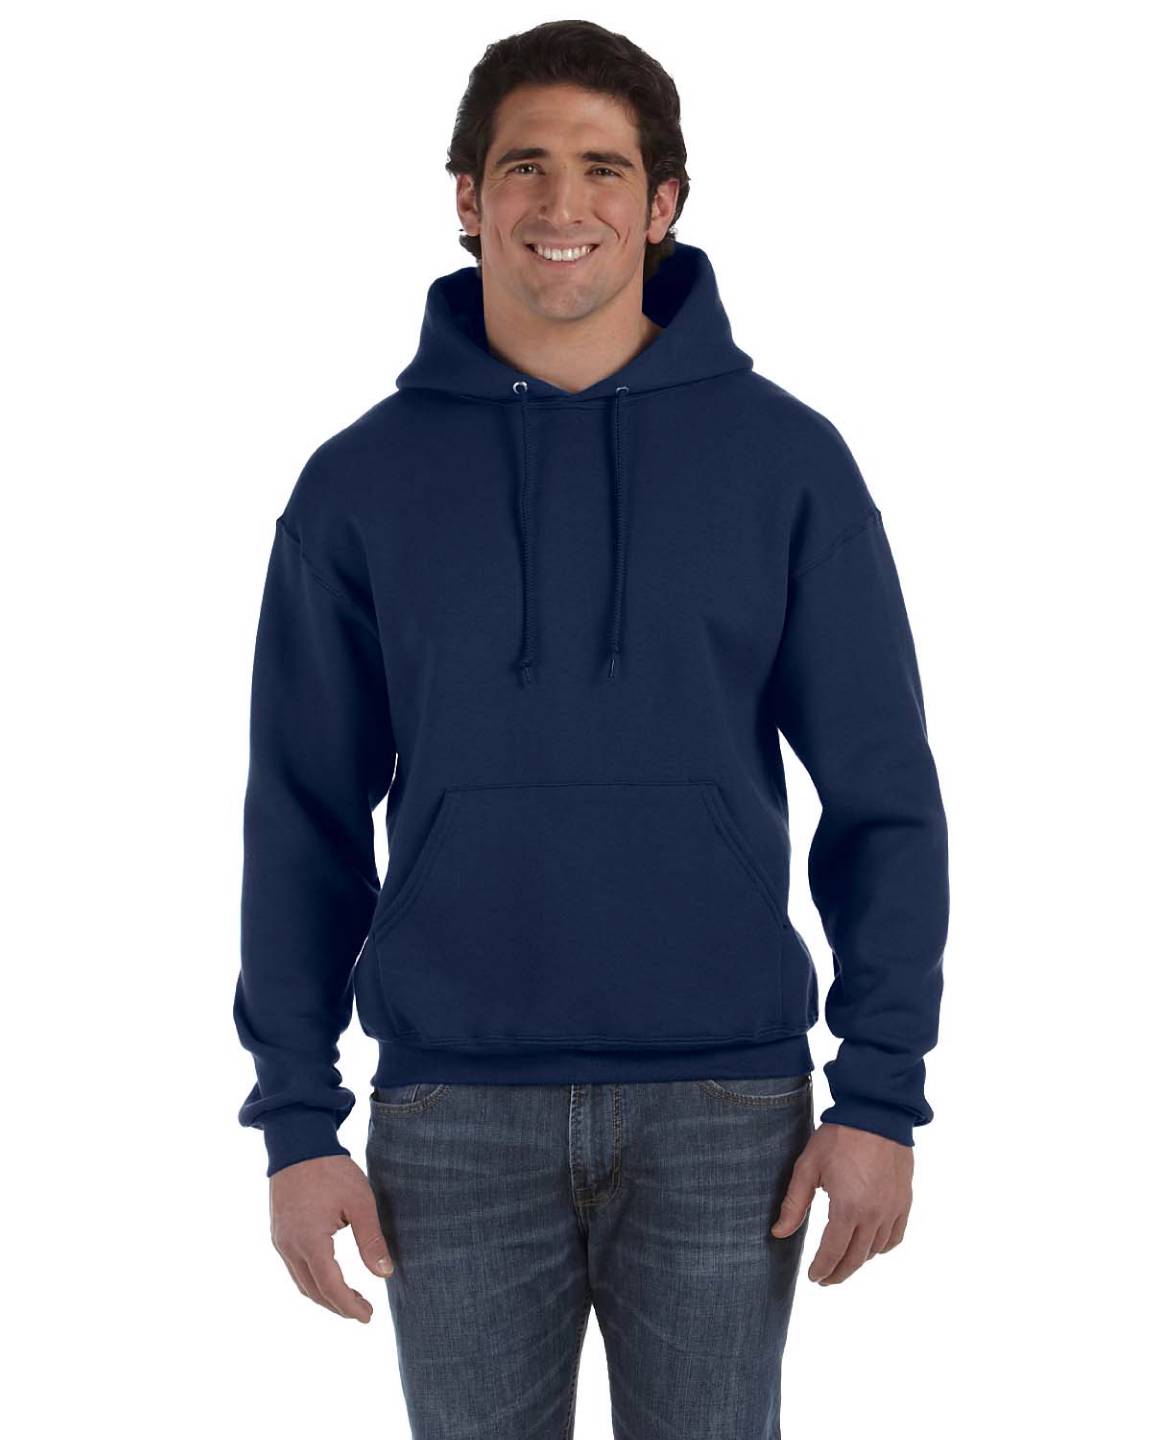 Fruit of the Loom 12 oz Supercotton 70/30 Pullover Hoodie Fleece S-3XL ...